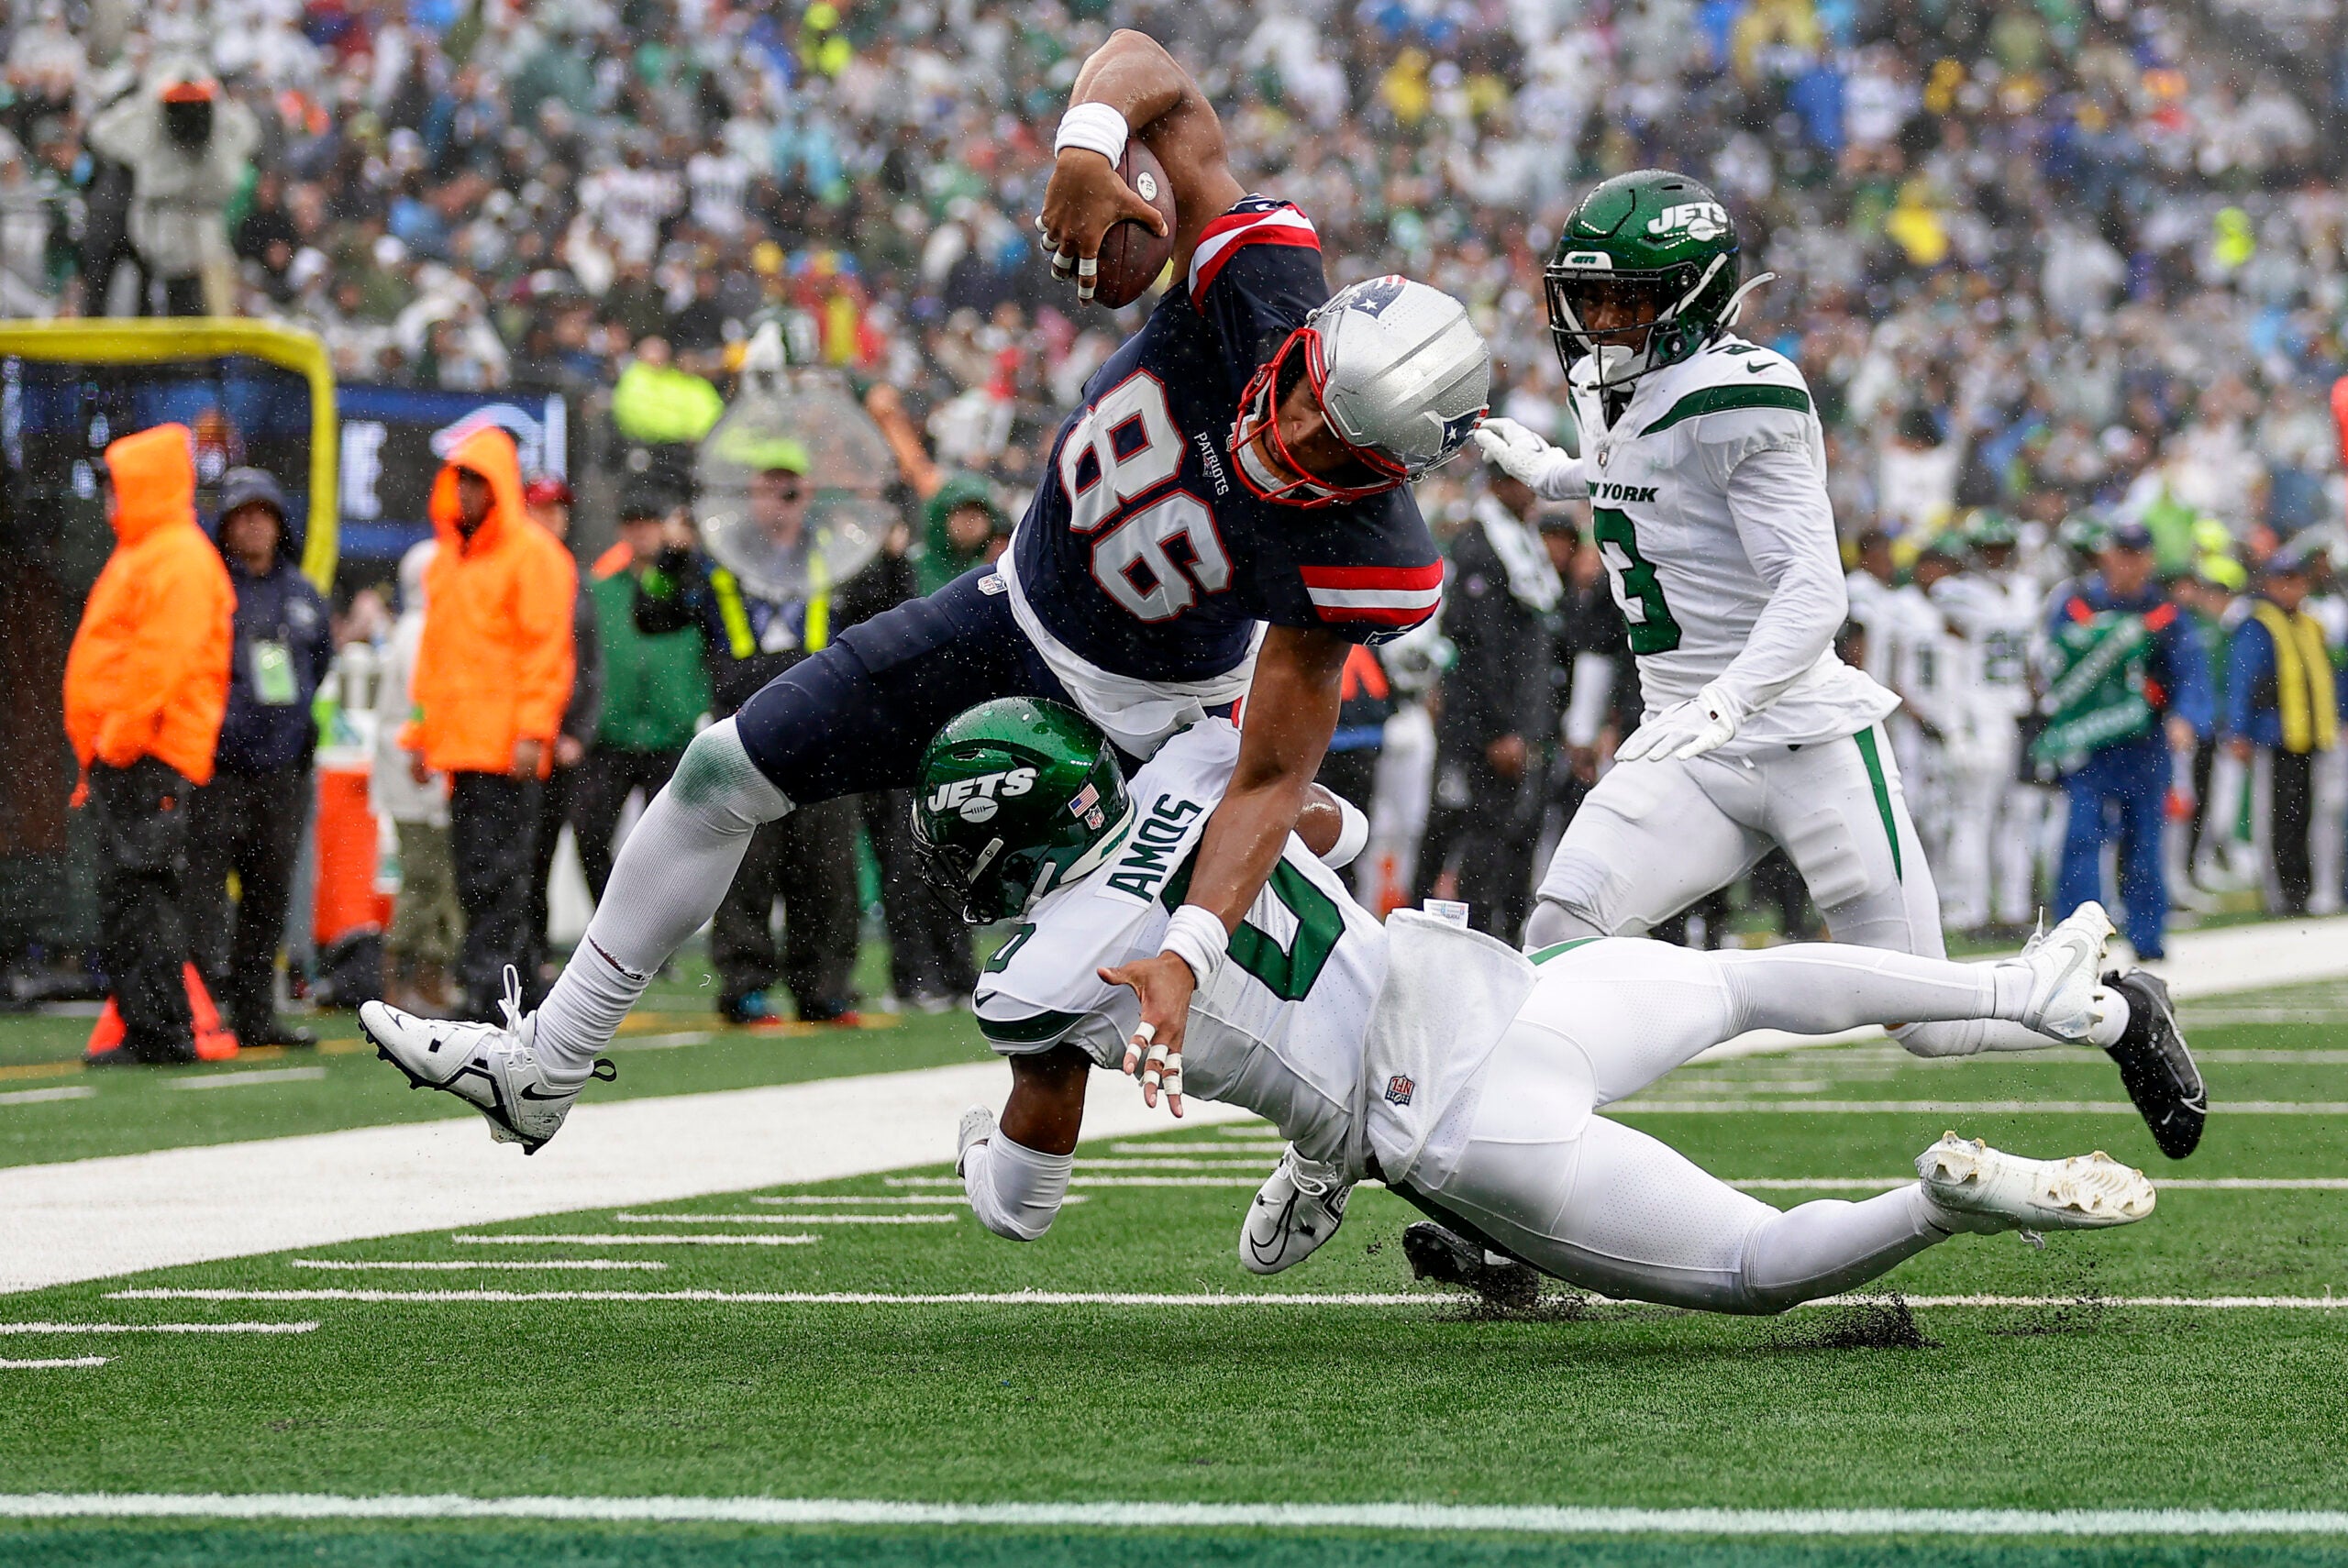 New England Patriots tight end Pharaoh Brown (86) pushes for the end zone against New York Jets safety Adrian Amos (0) to score a touchdown during the second quarter of an NFL football game, Sunday, Sept. 24, 2023, in East Rutherford, N.J.